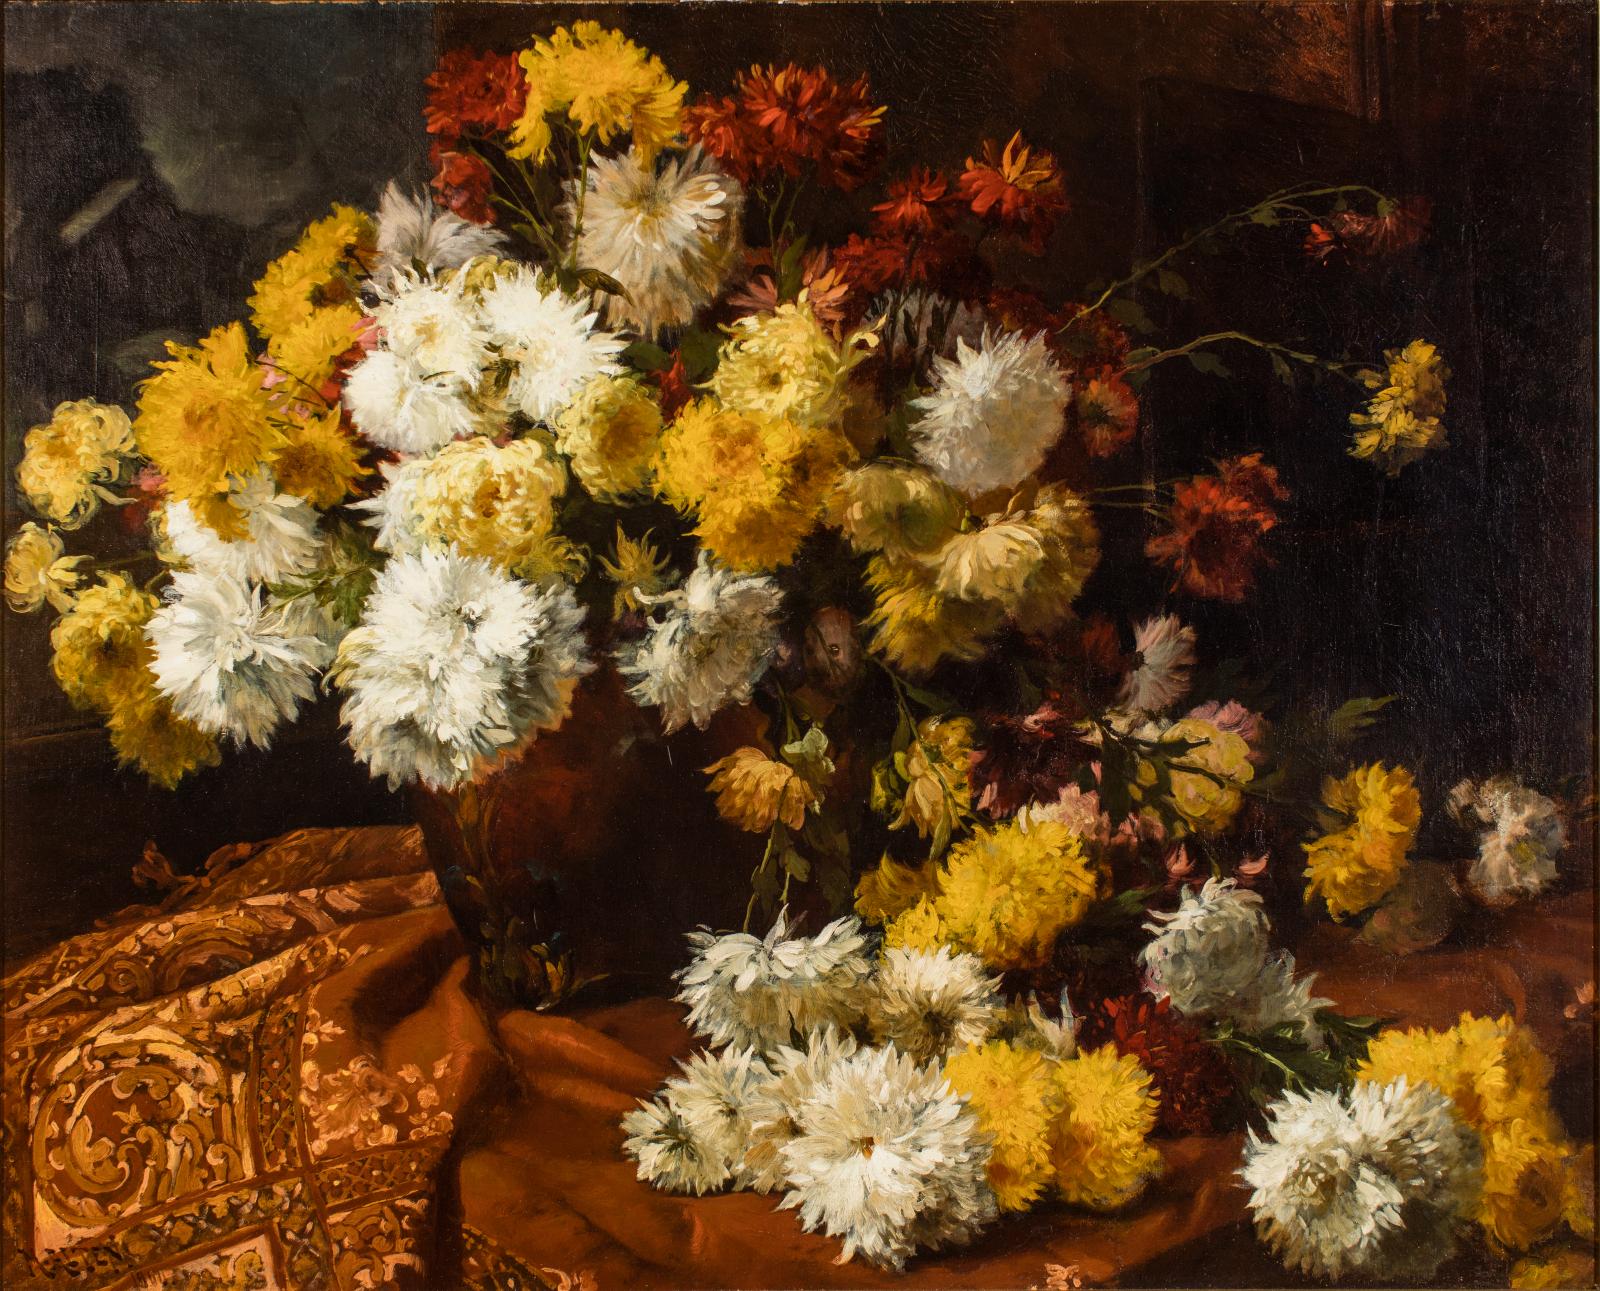 Still life of yellow and white chrysanthemum flowers against a dark background and a fabric covered table.